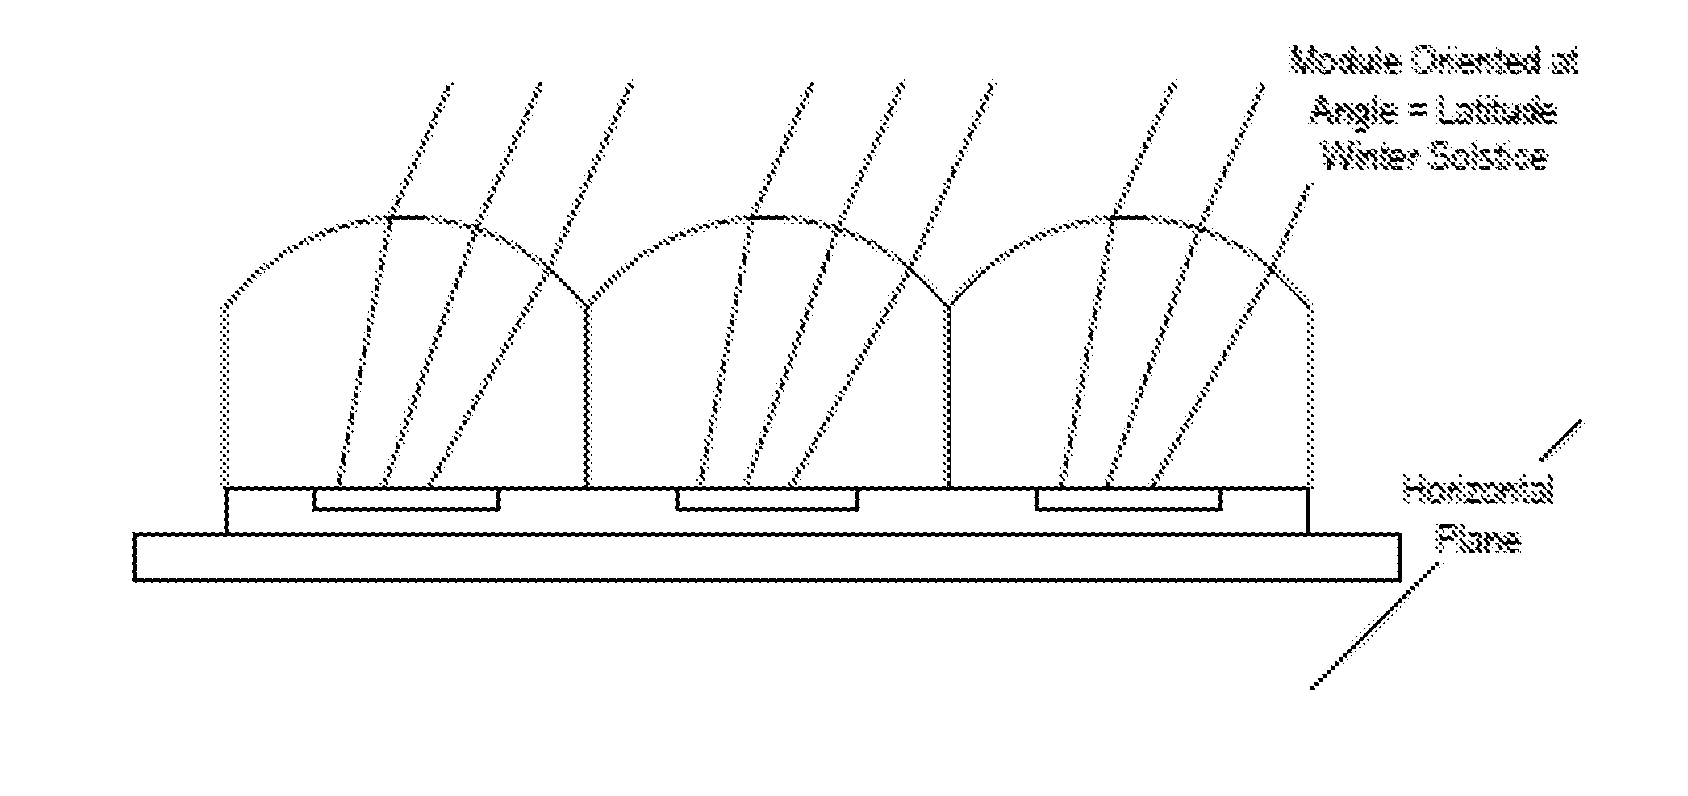 Large area concentrator lens structure and method configured for stress relief